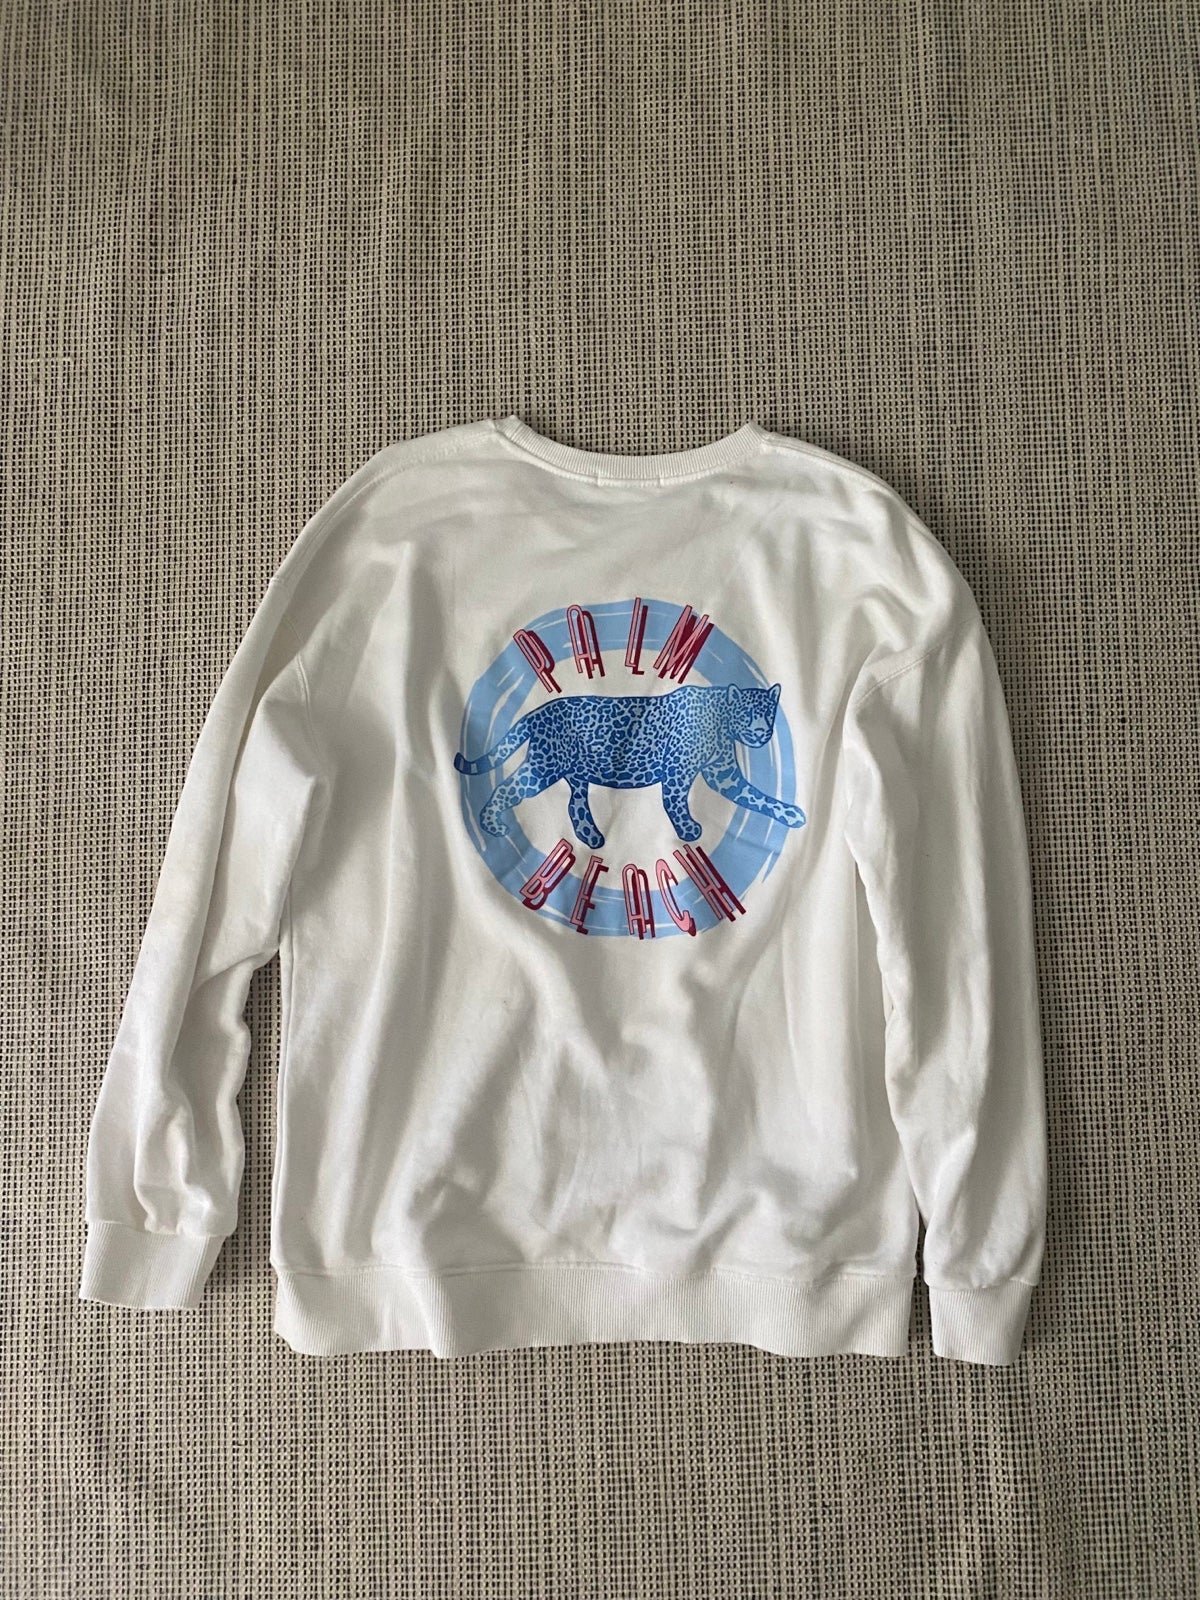 Special offer  Brand new White cotton sweatshirt gjgs5W2pT on sale